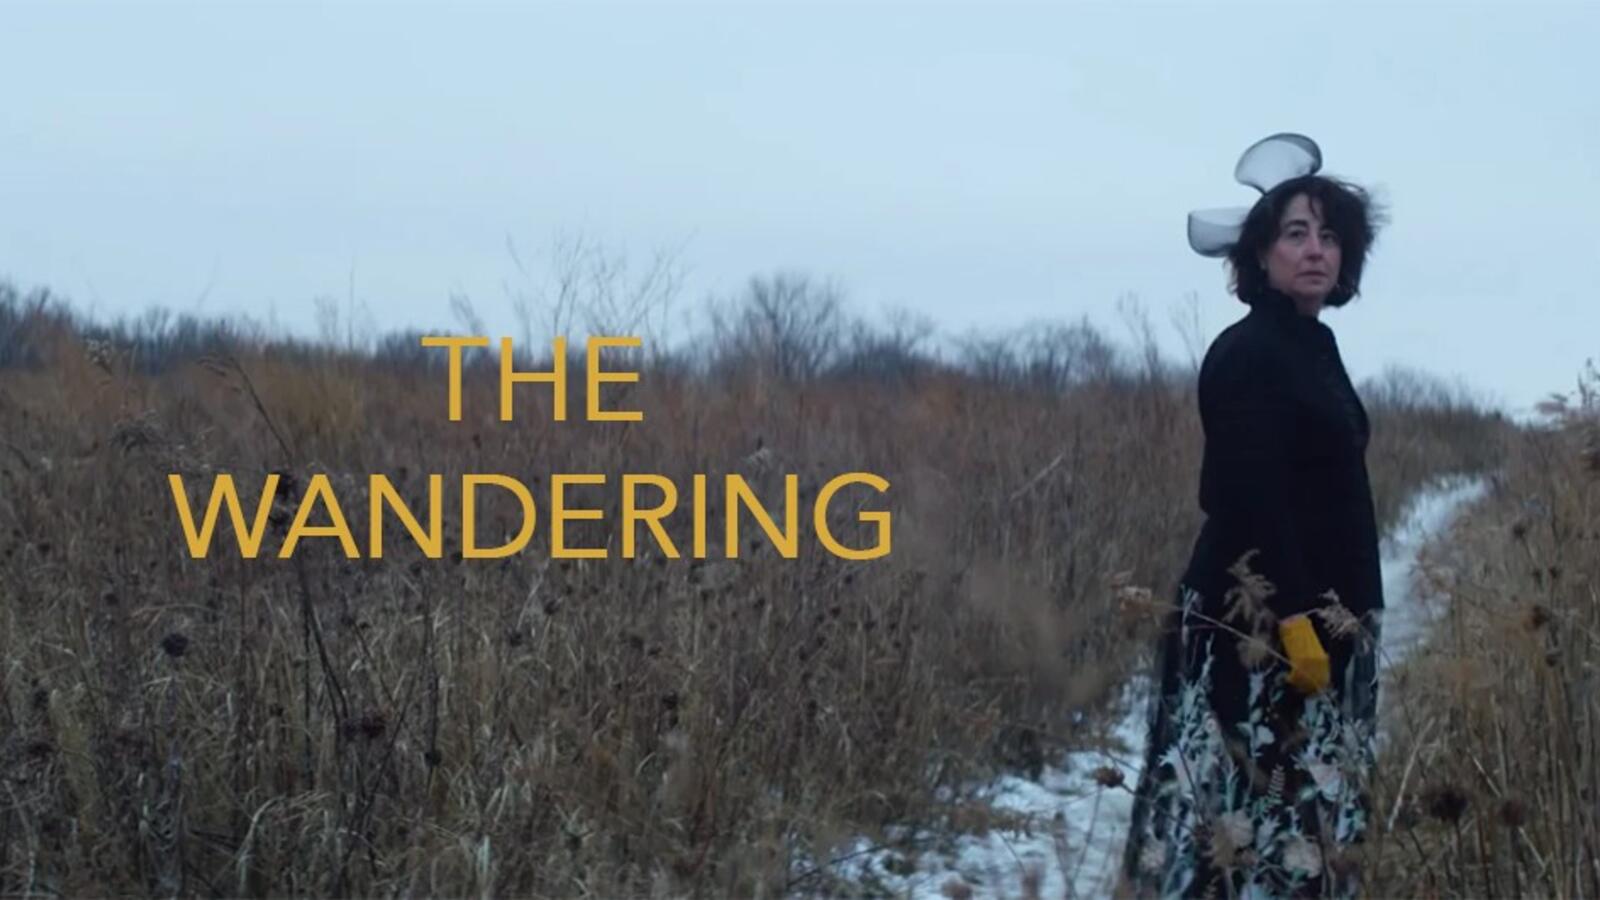 "The Wandering" promotional image